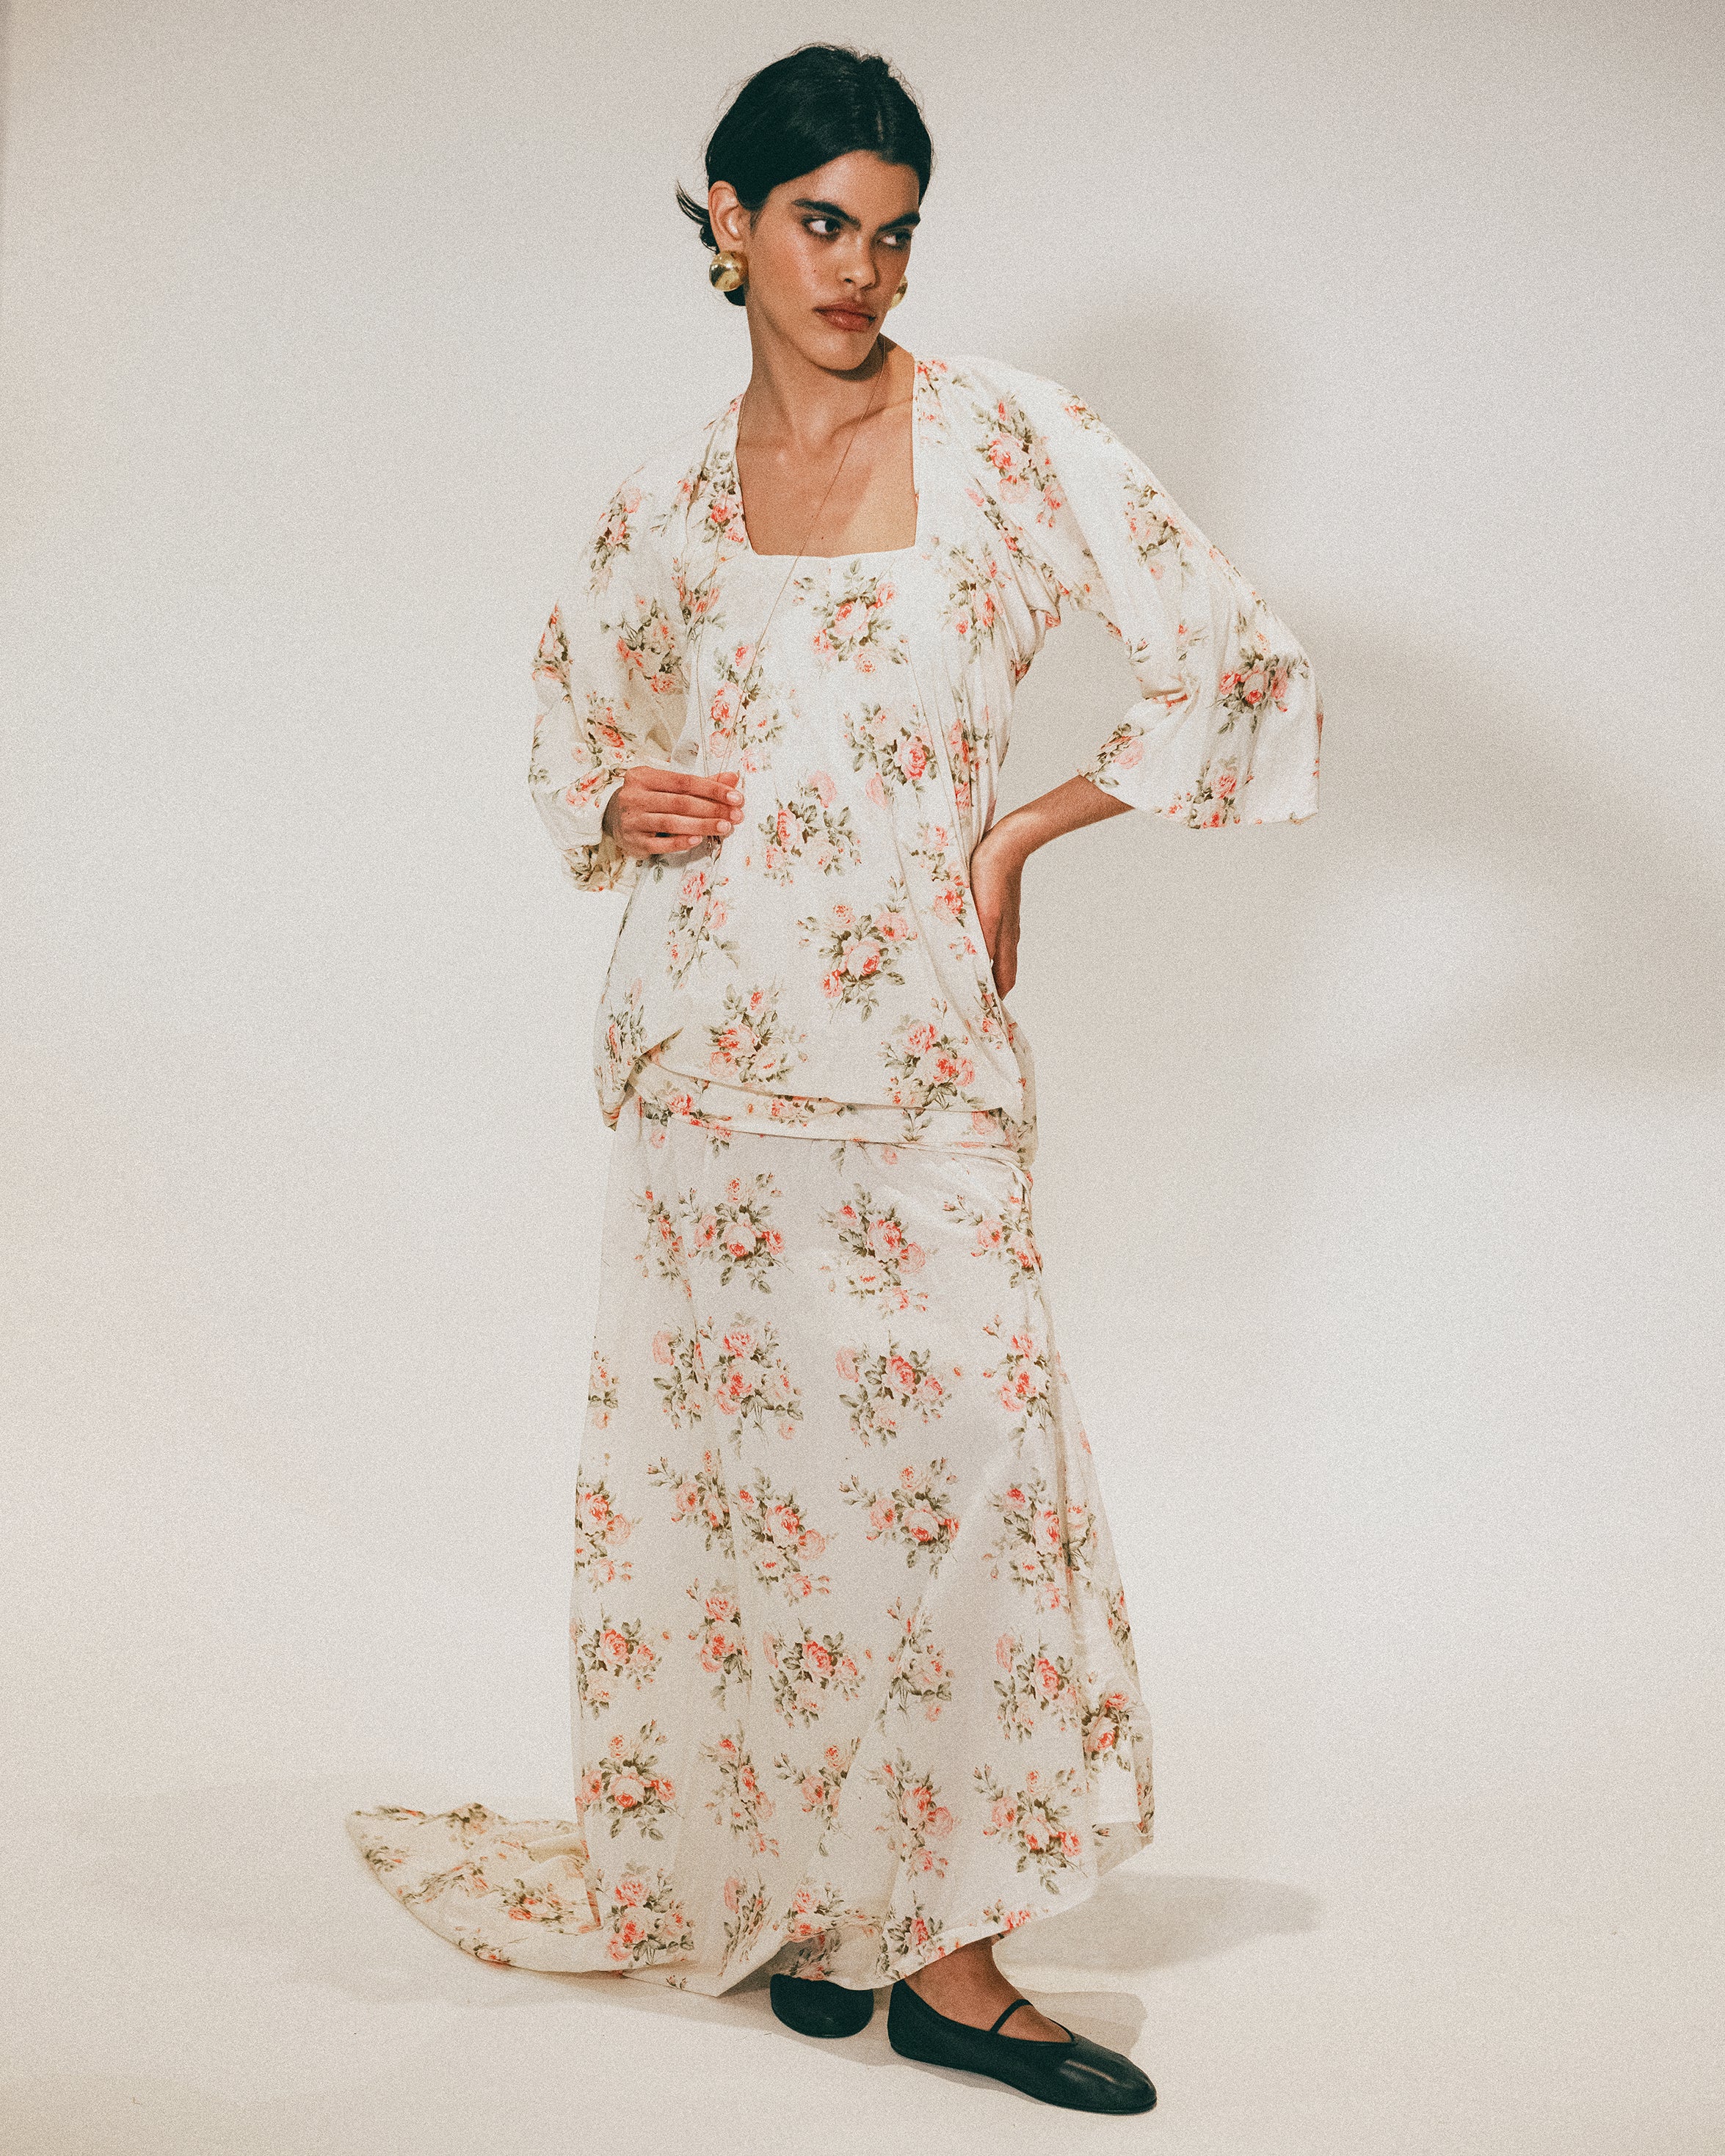 S/S 2008 Ecru Cotton Dress with Pink Floral Pattern